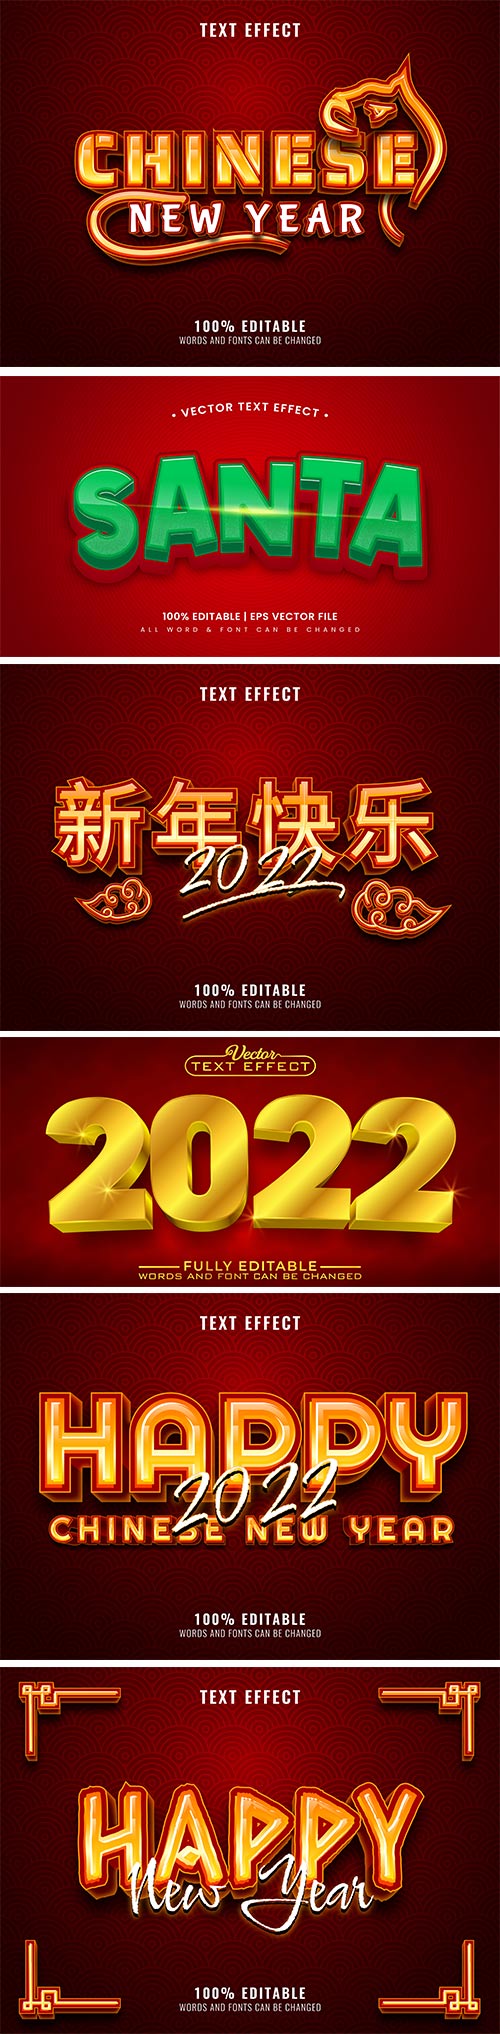 Chinese New year text vector effect